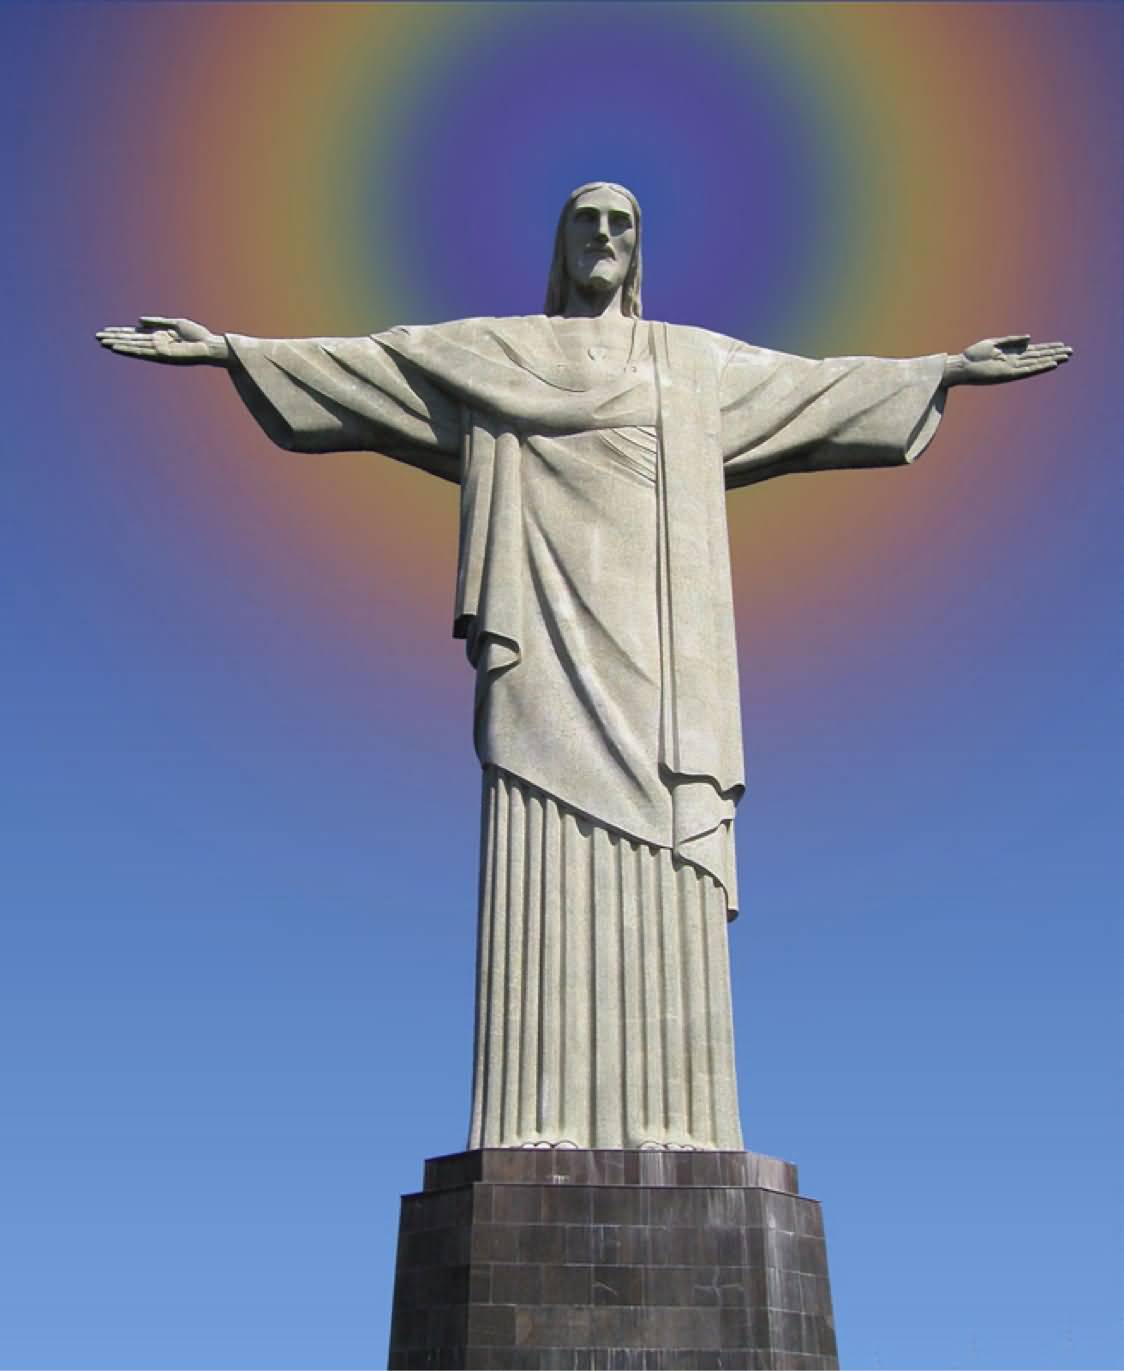 Rainbow Behind The Christ The Redeemer Statue